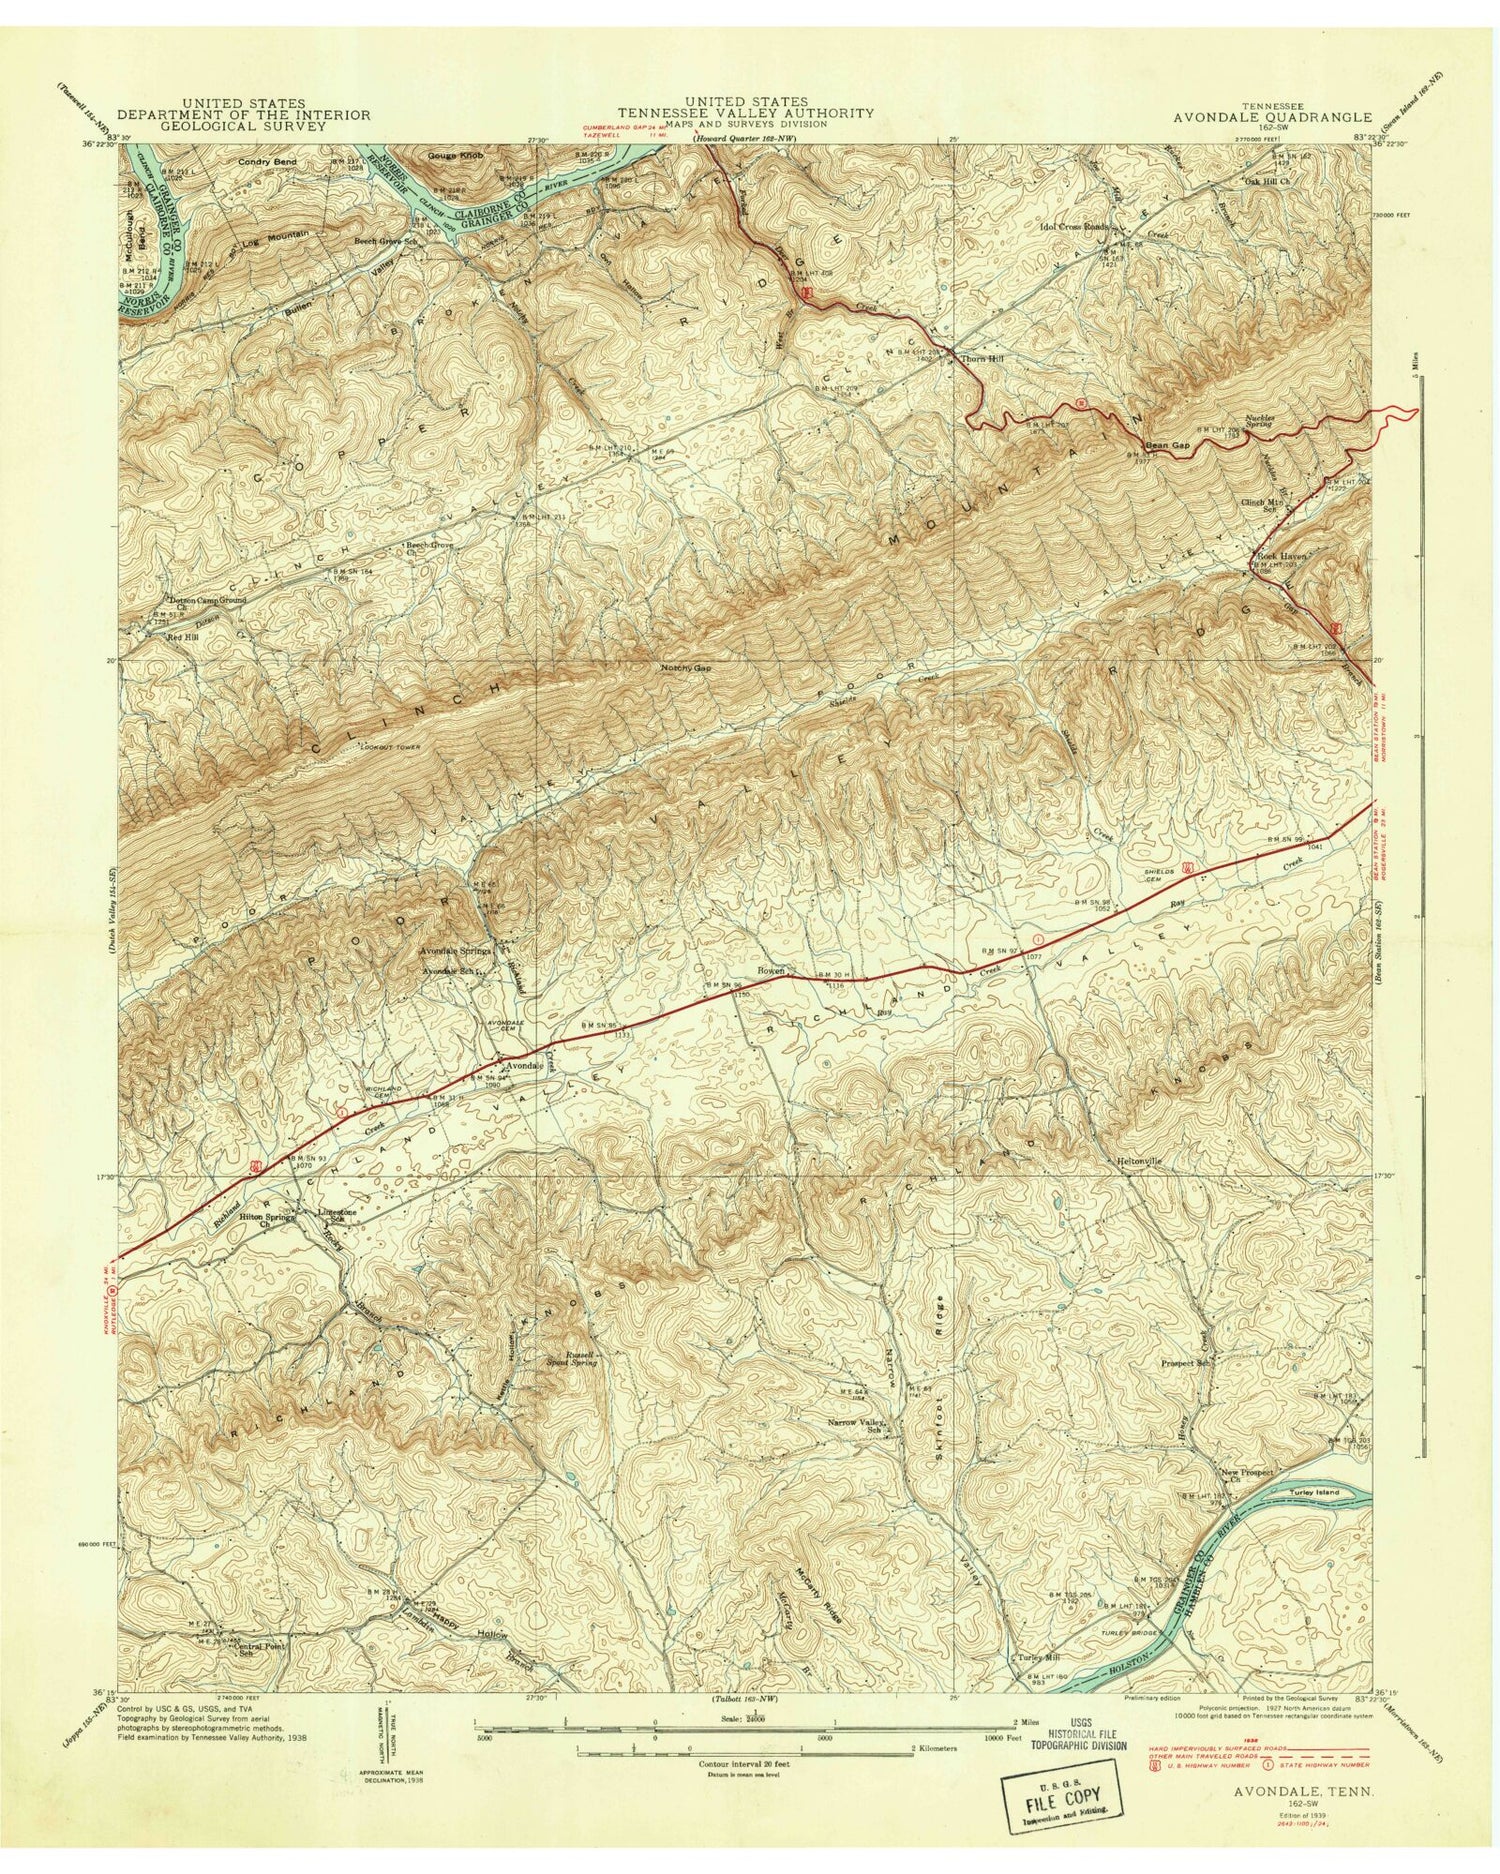 Classic USGS Avondale Tennessee 7.5'x7.5' Topo Map Image